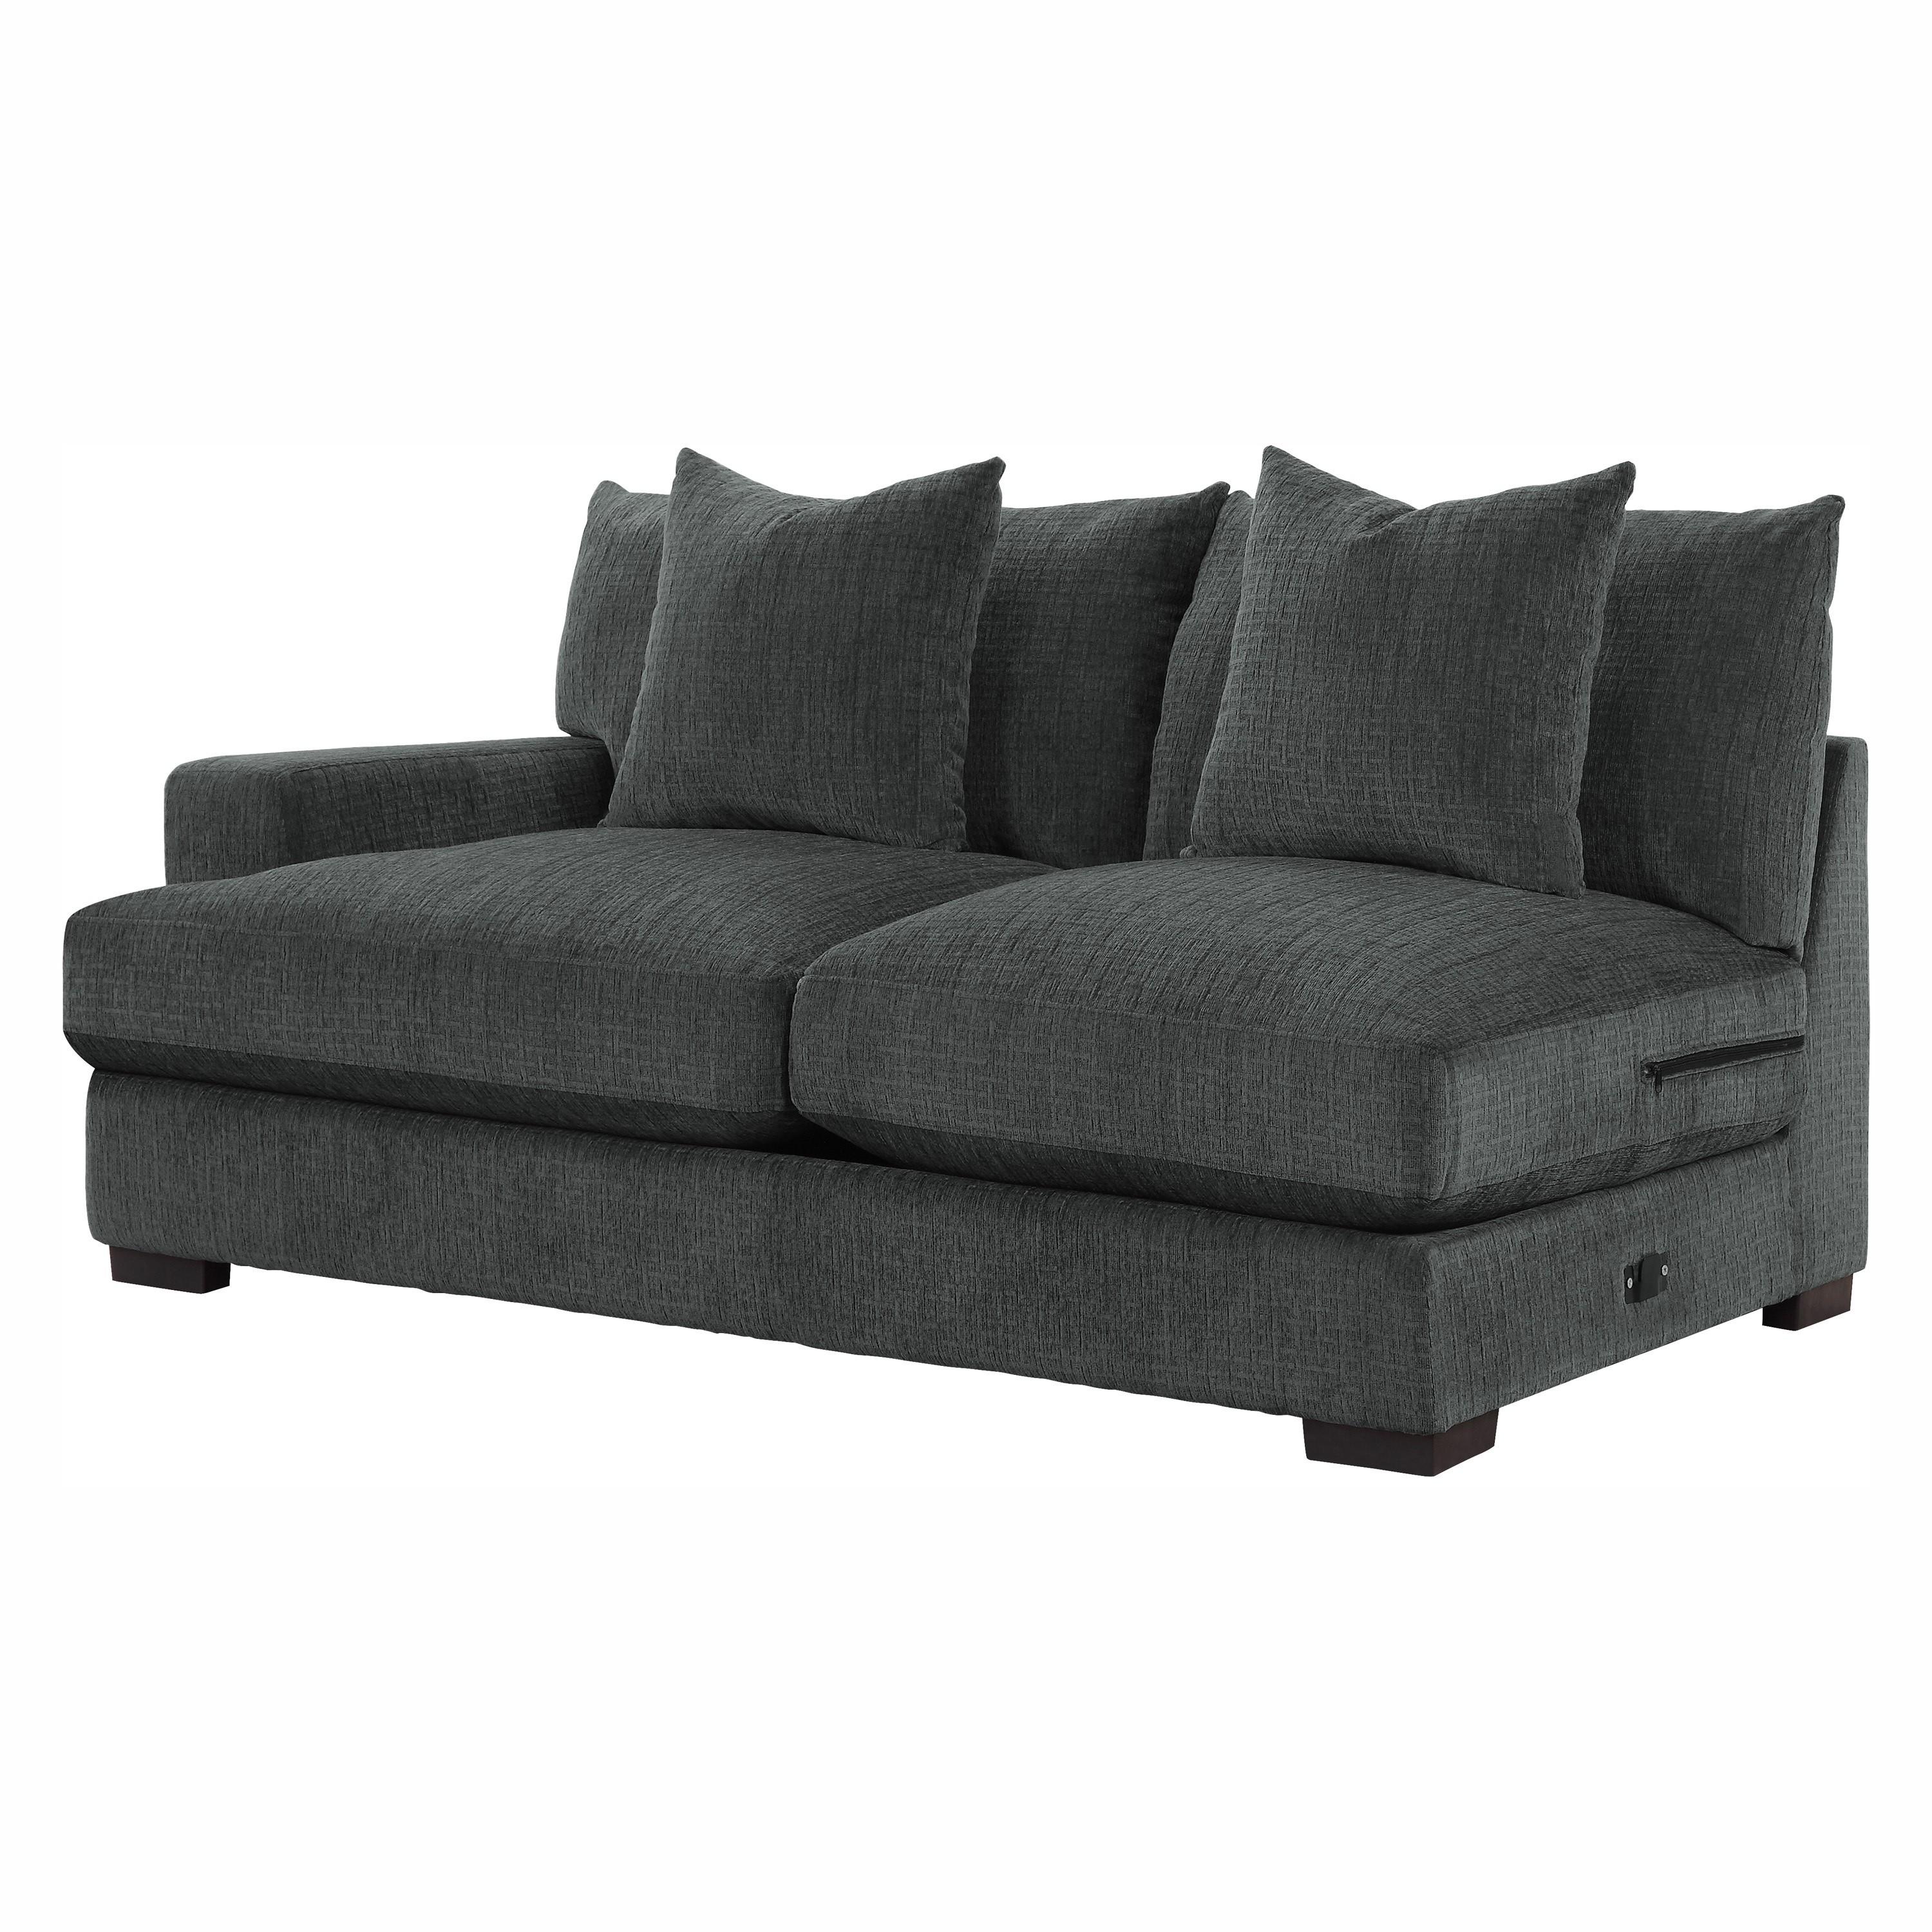 Transitional Sectional 9857DG-2L Worchester 9857DG-2L in Dark Gray Chenille